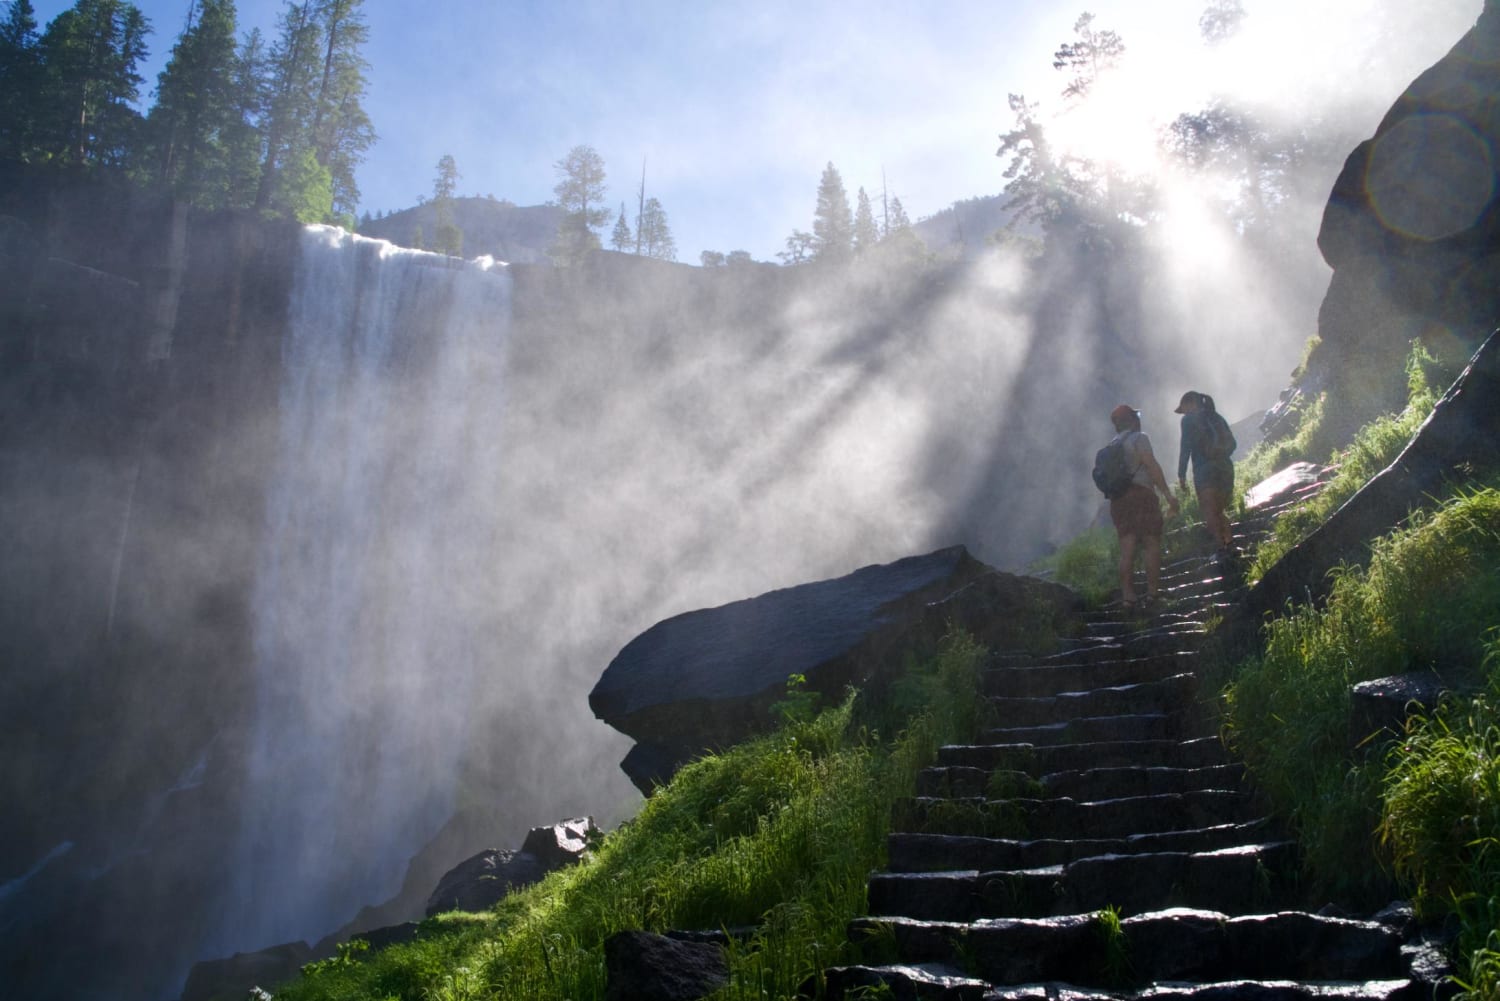 Vernal Falls in Yosemite. Is that you in the pic? DM me for the full resolution version!